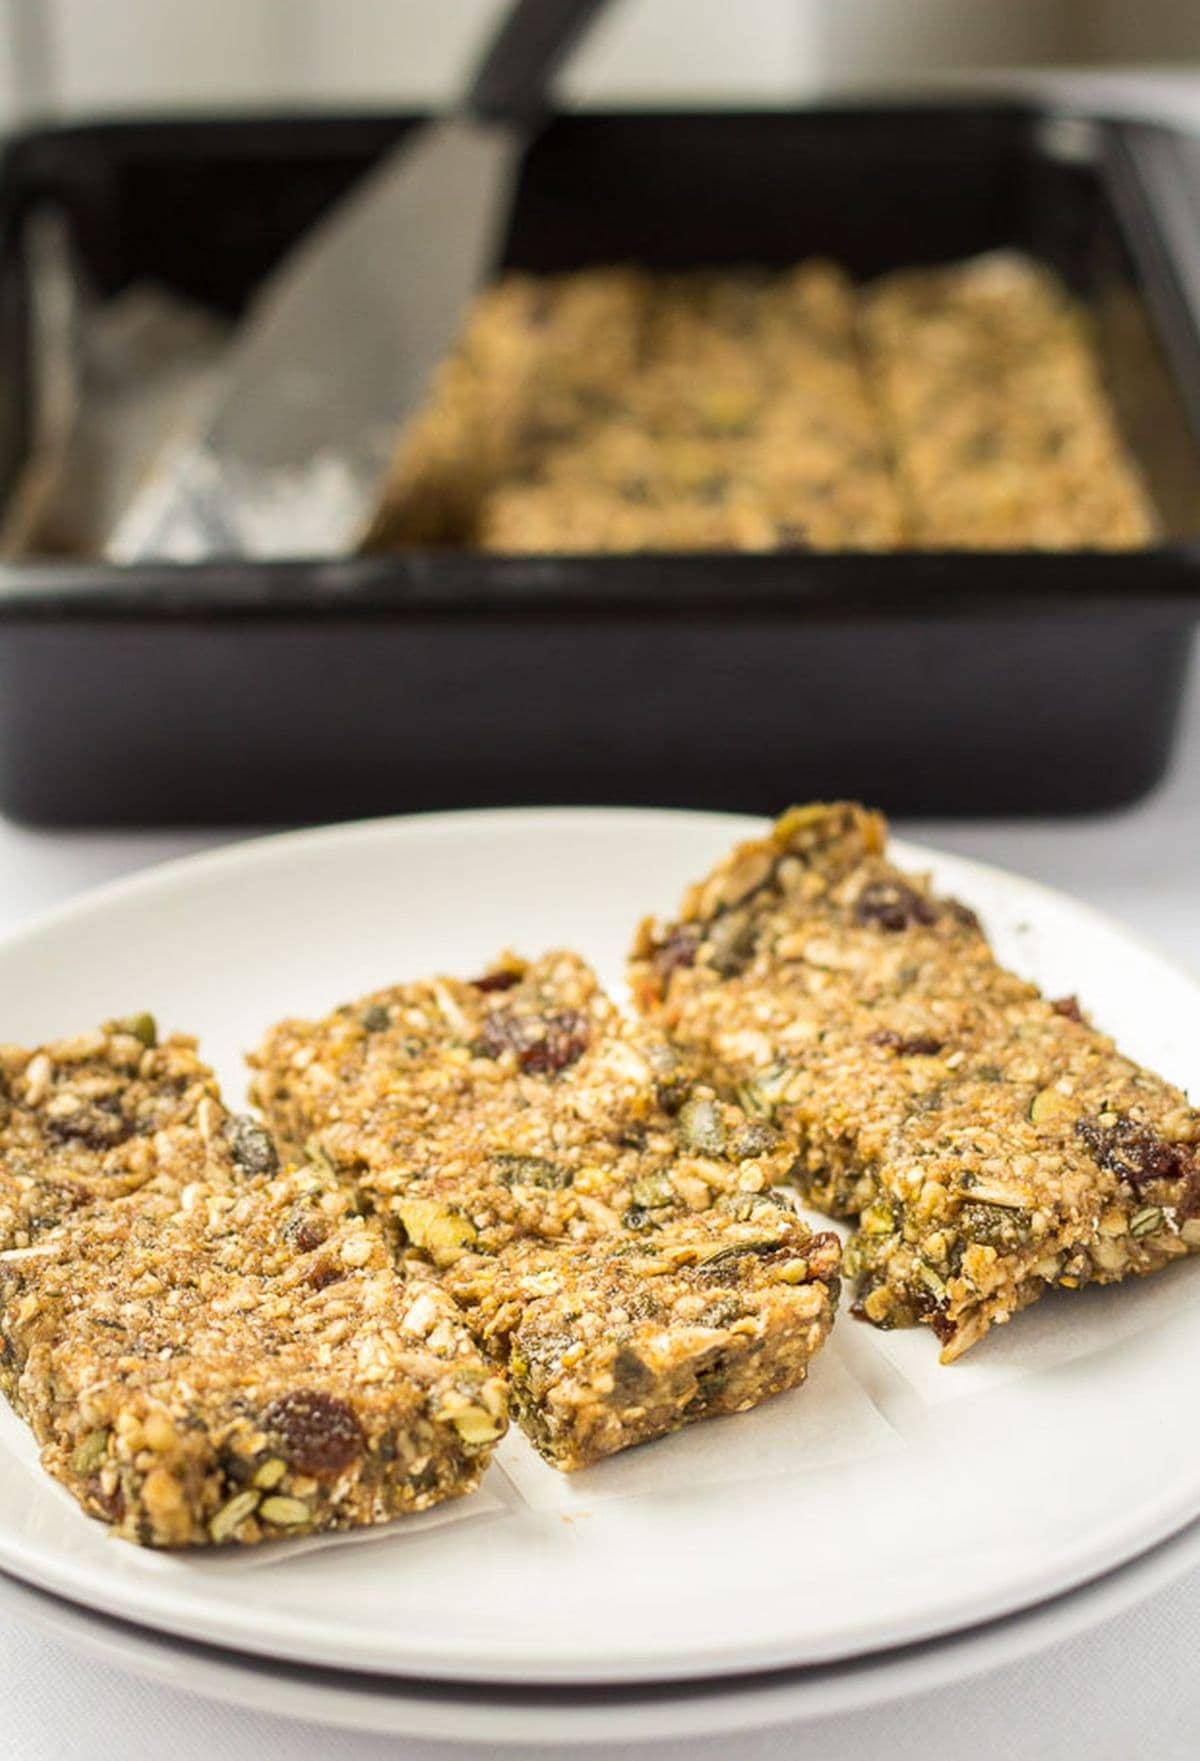 Three no bake banana energy bars on a plate with the rest in a baking dish in the background.